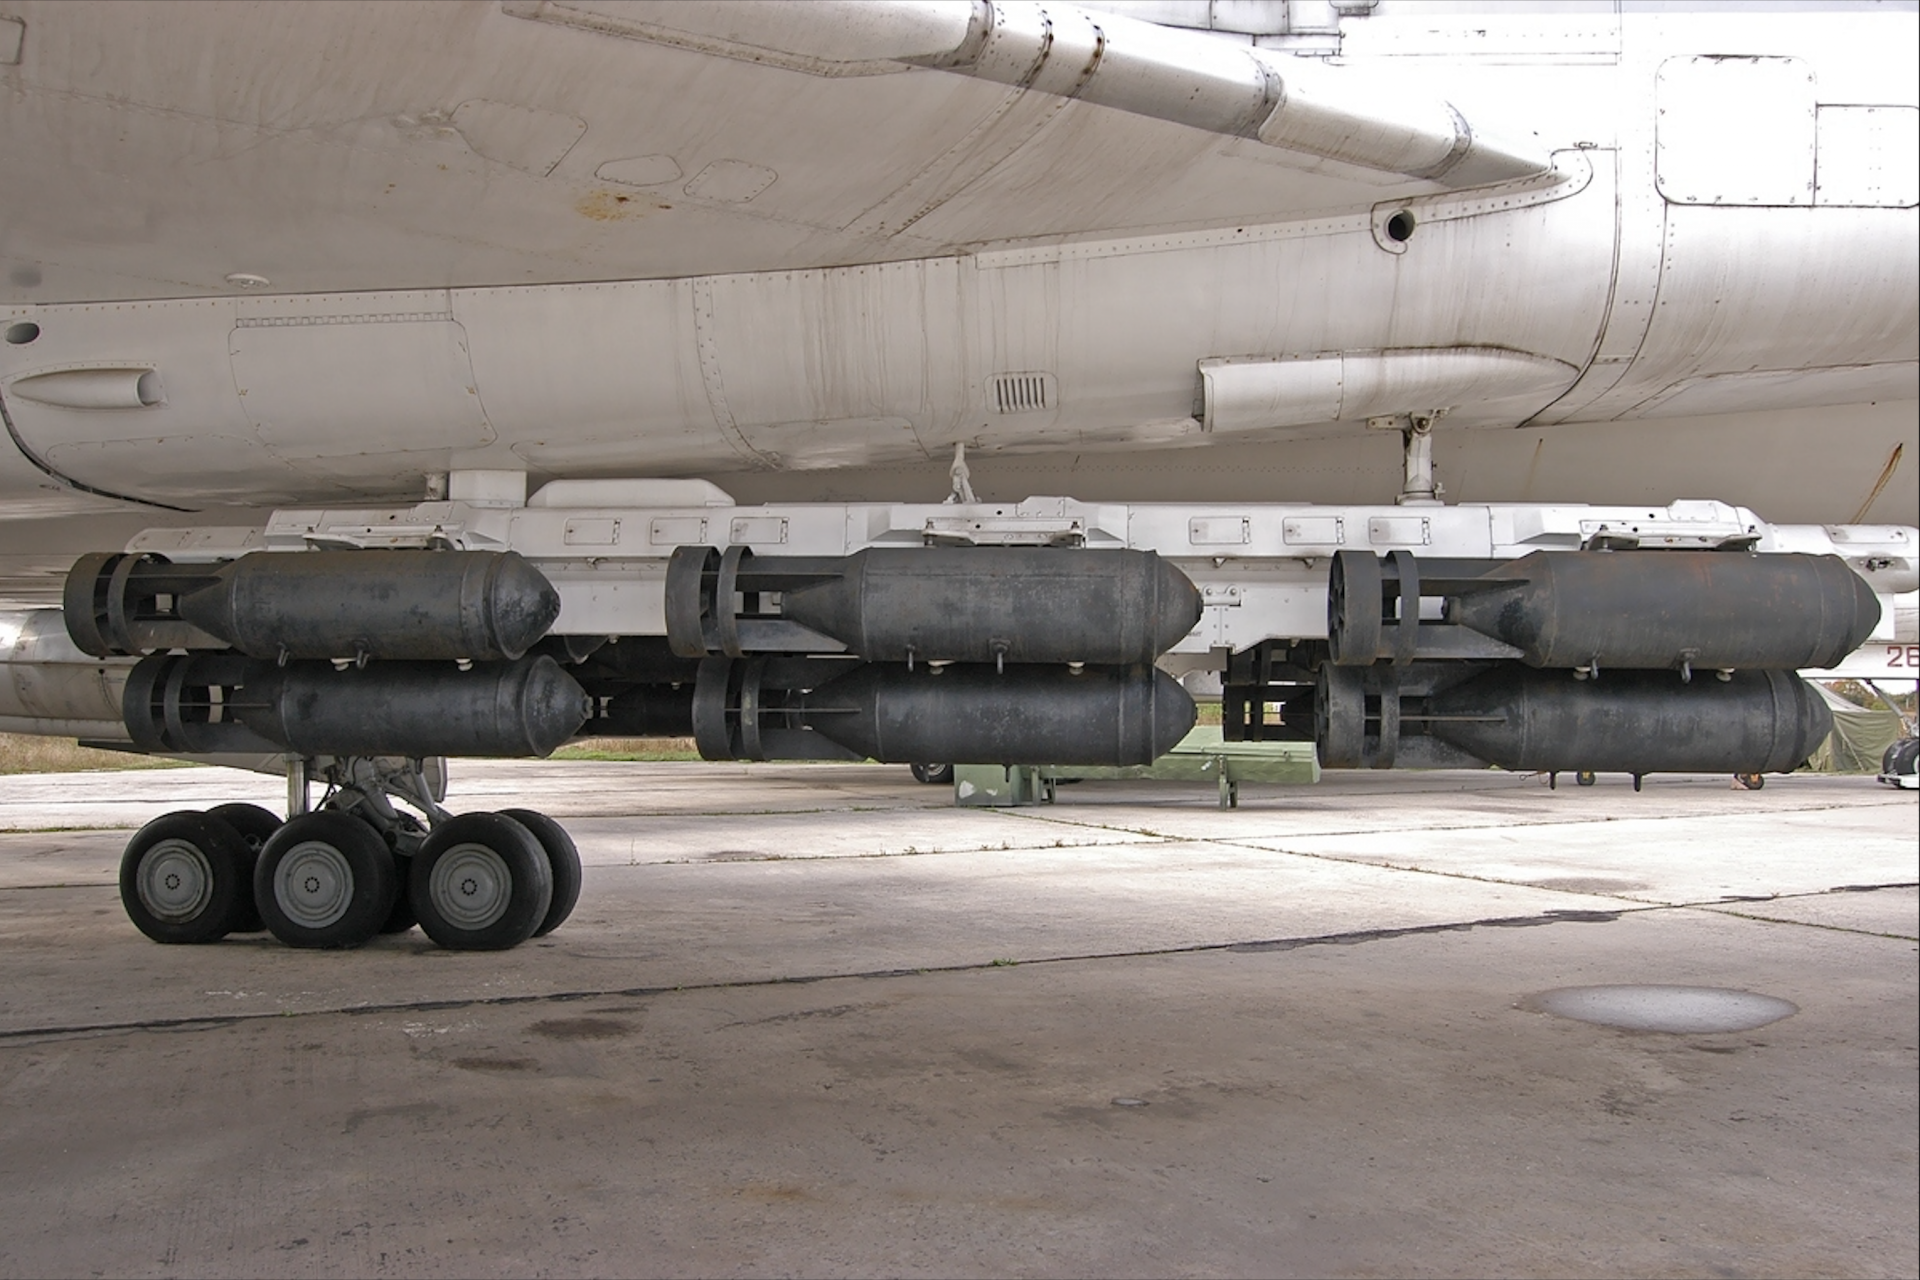 <p><span>Russia’s FAB series of bombs are actually weapons inherited from the Soviet Union that were originally developed in the 1950s and later modified to be fitted to fighter bombers in the 1960s according to Kyiv Post. </span></p> <p>Photo Credit: Wiki Commons By Pavel Adzhigildaev, CC BY-SA 3.0</p>